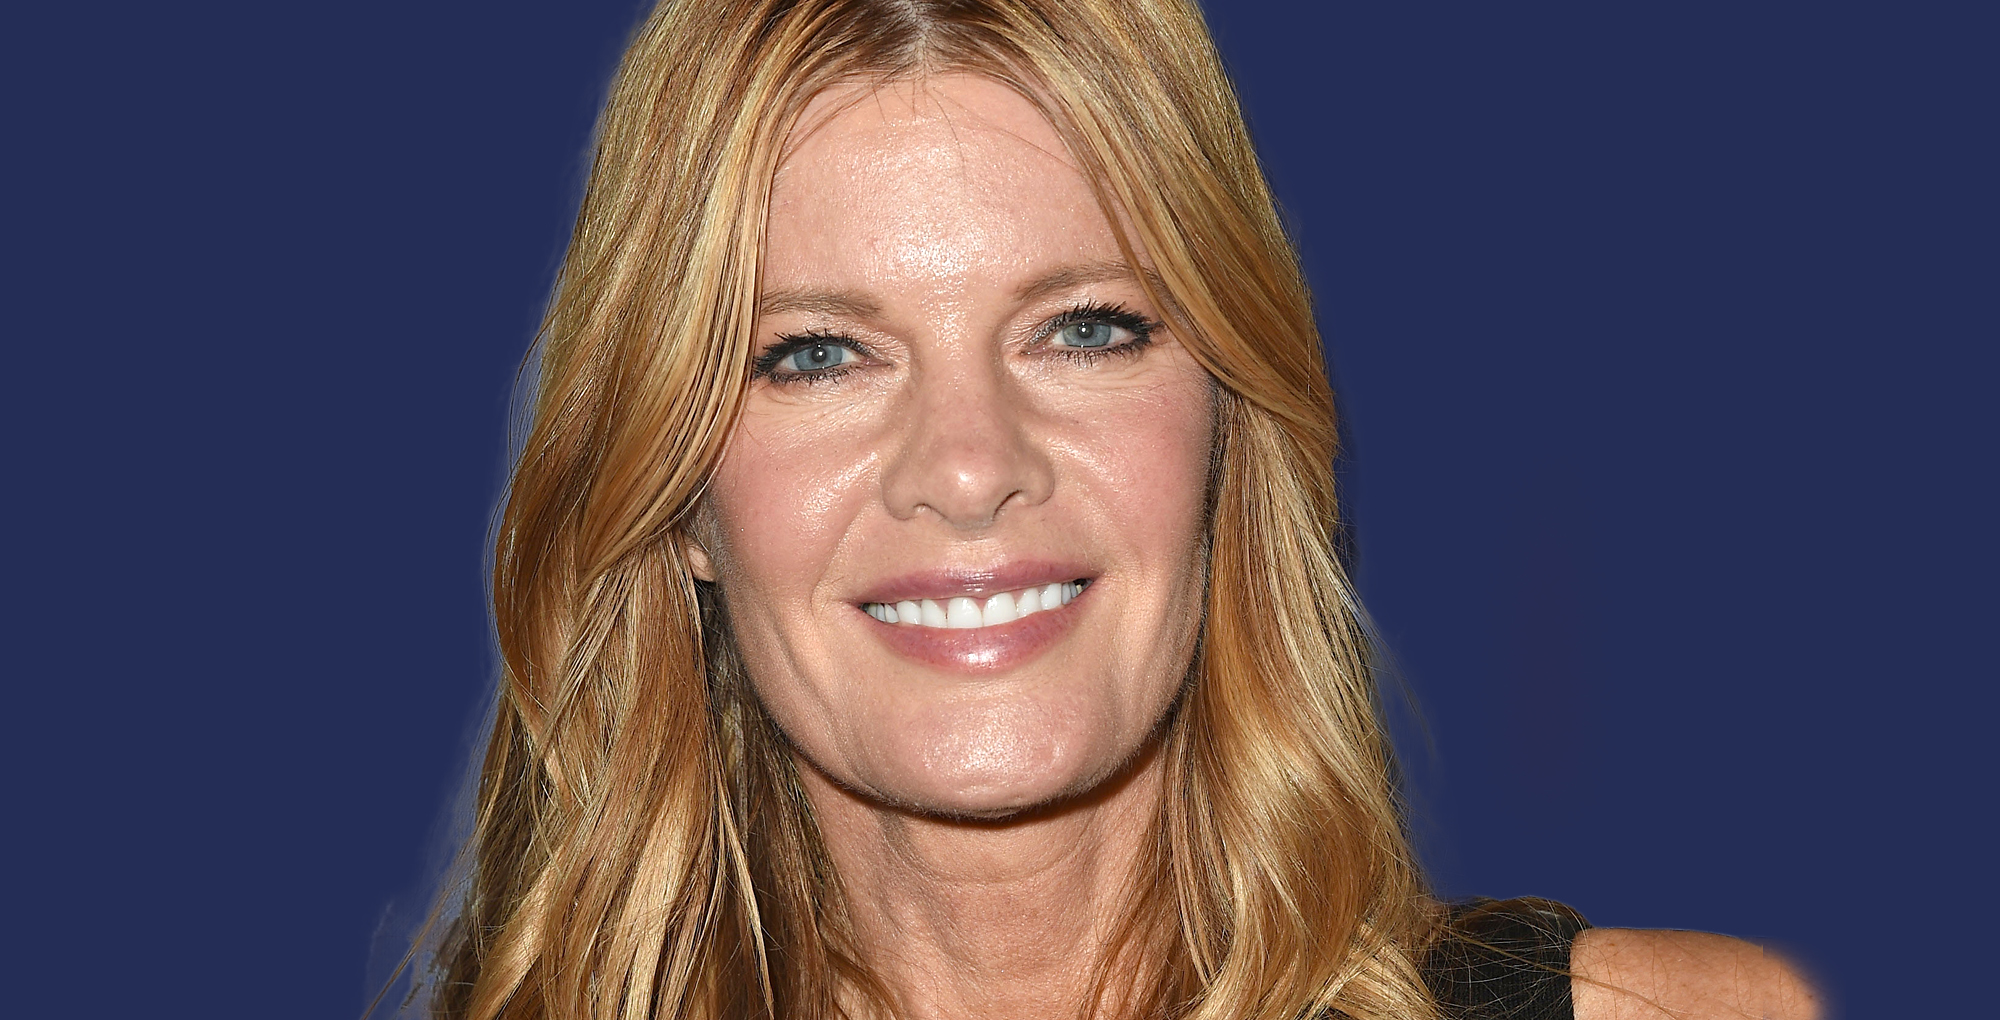 michelle stafford plays phyllis summers on young and the restless.